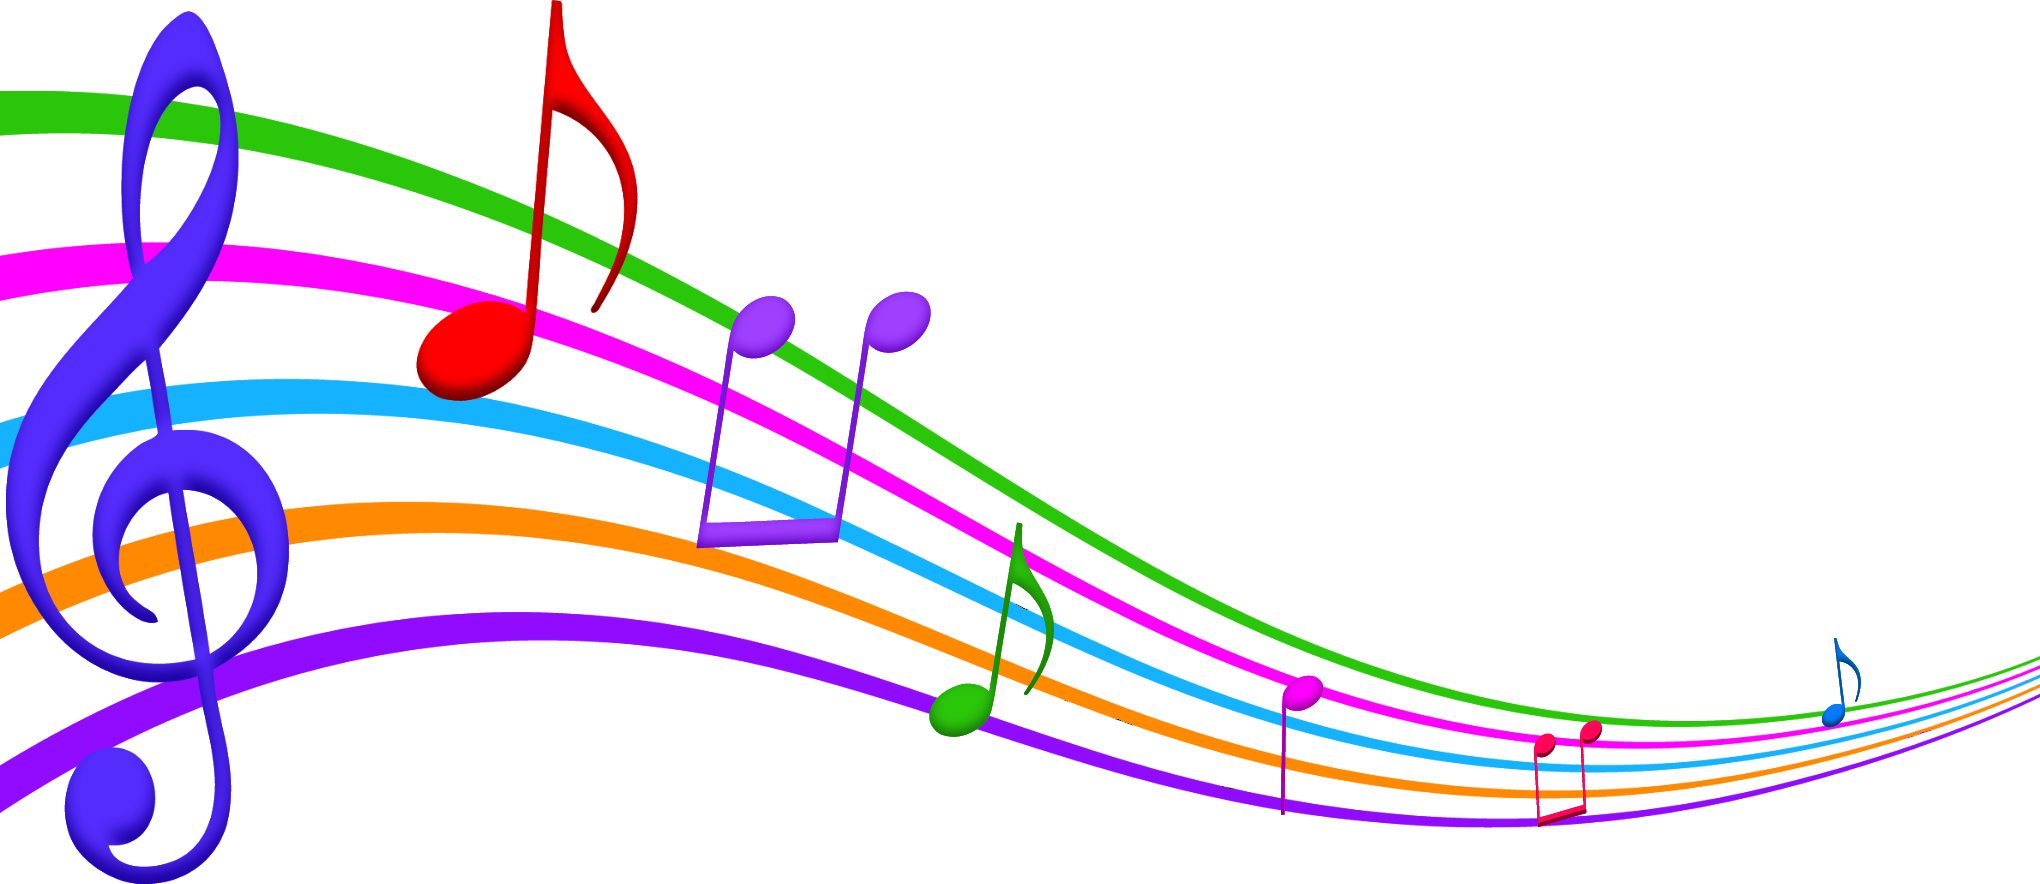 image-688723-Music-notes-musical-clip-art-free-music-note-clipart.png